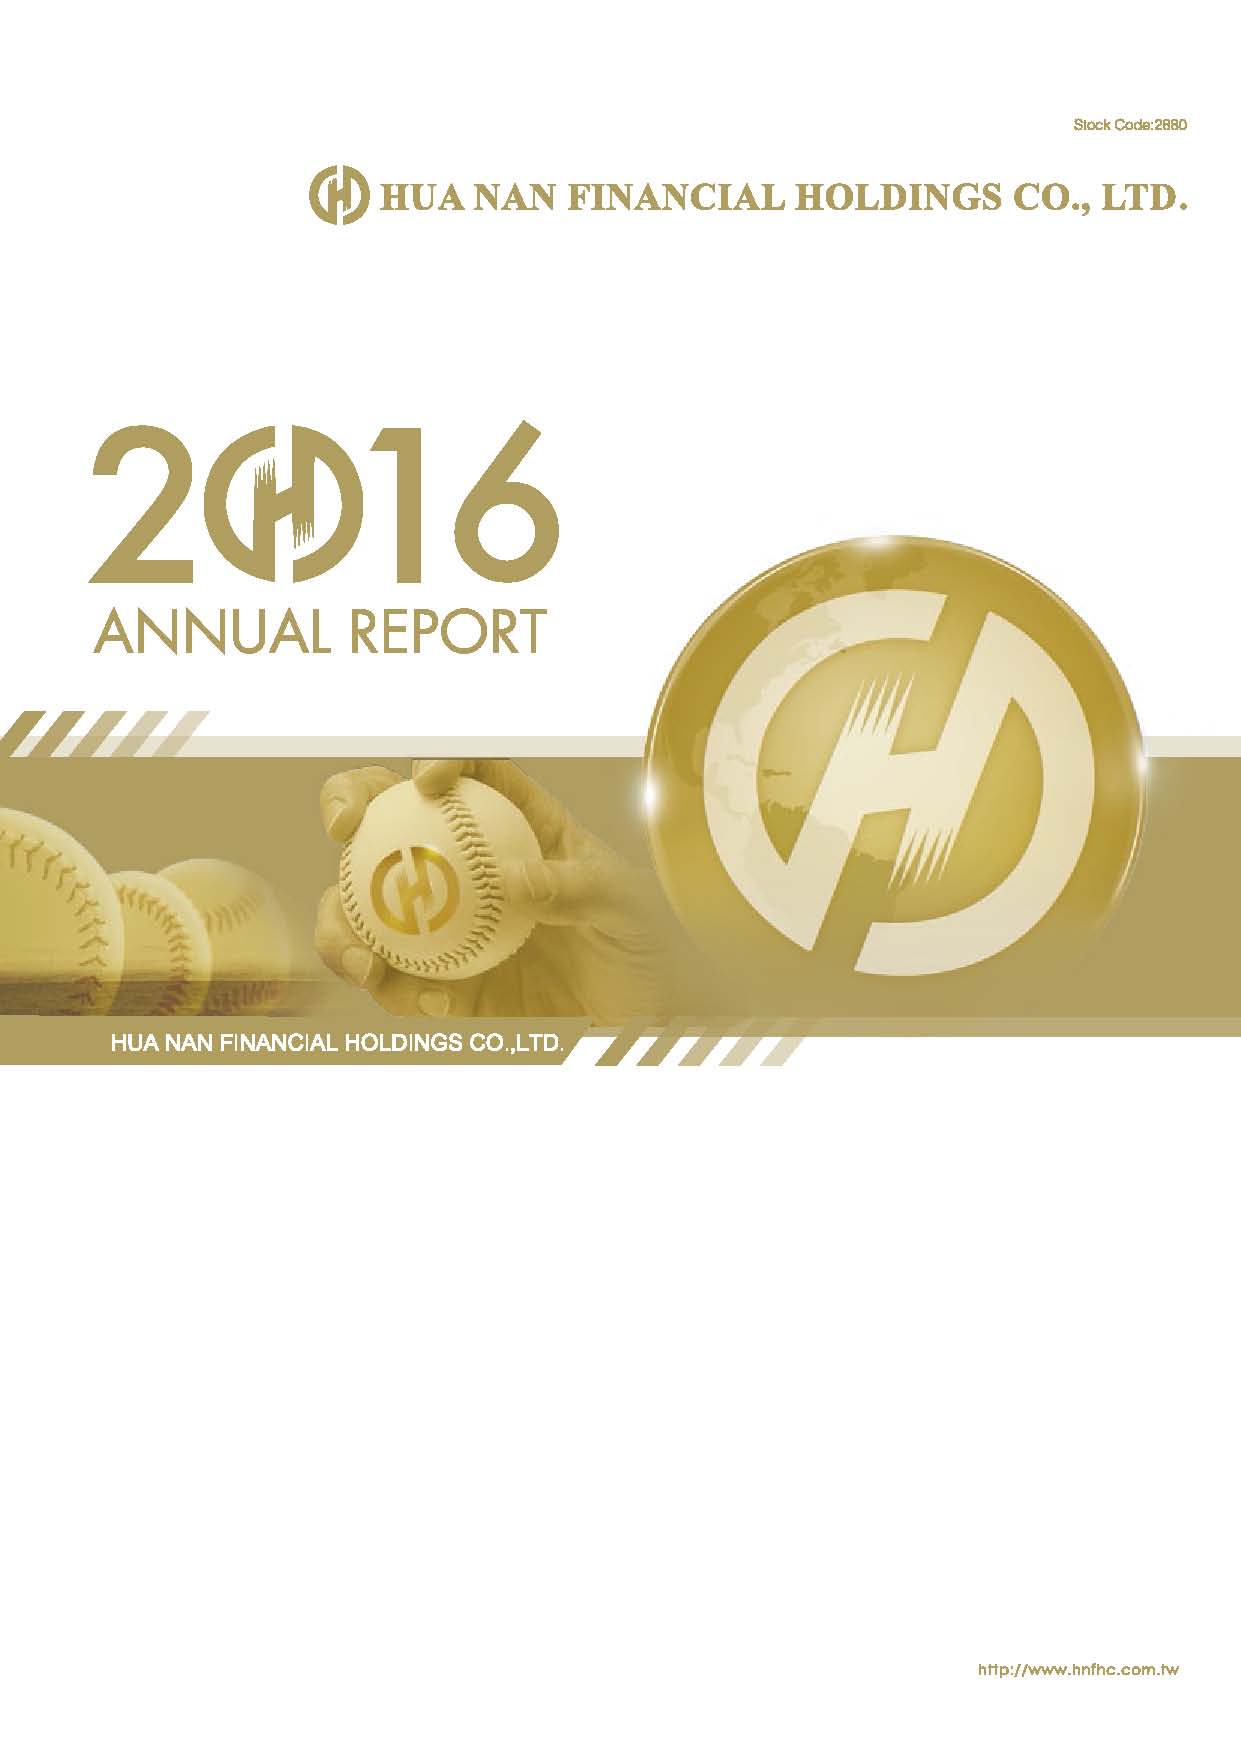 The cover of 2016 Annual Reports